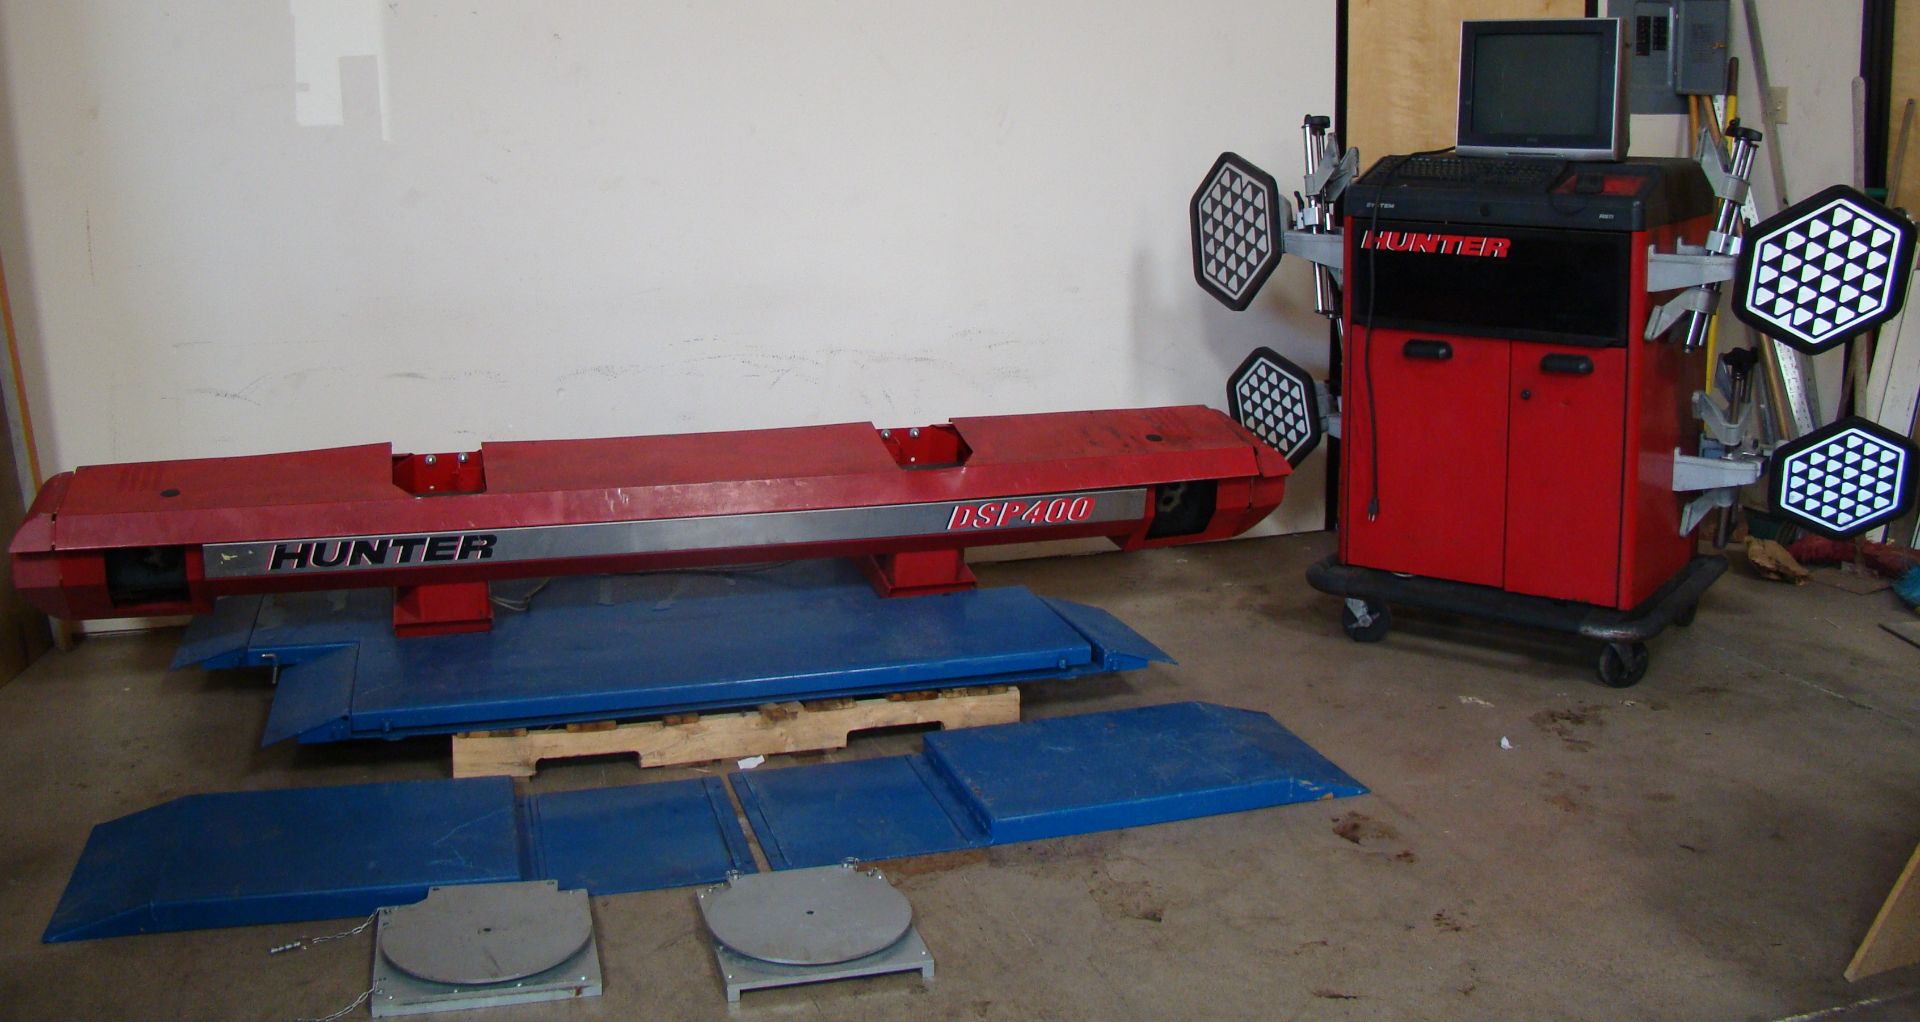 Hunter DSP400 Alignment Machine, 4-DSP 400 sensors, compter, & mobile cart on wheels